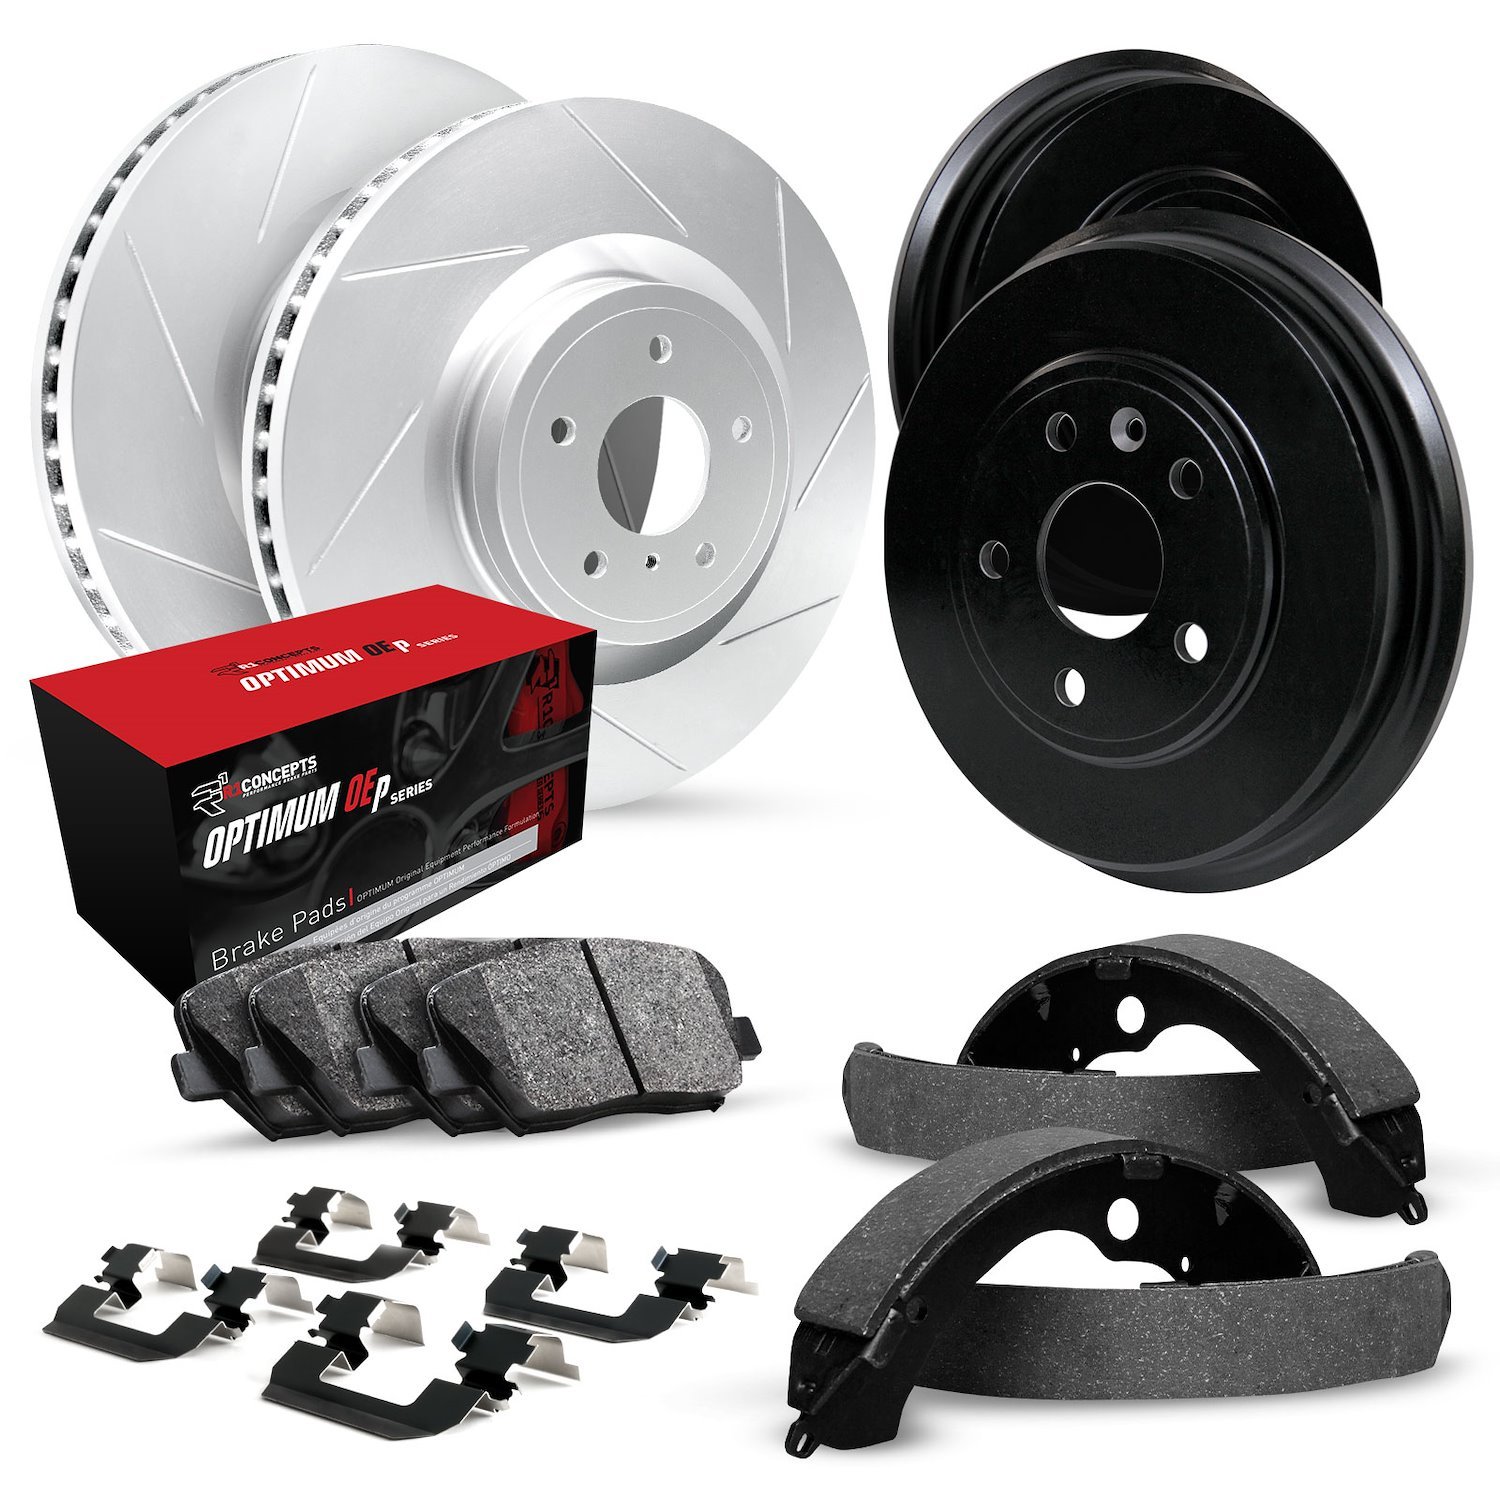 GEO-Carbon Slotted Brake Rotor & Drum Set w/Optimum OE Pads, Shoes, & Hardware, 1988-2000 GM, Position: Front & Rear